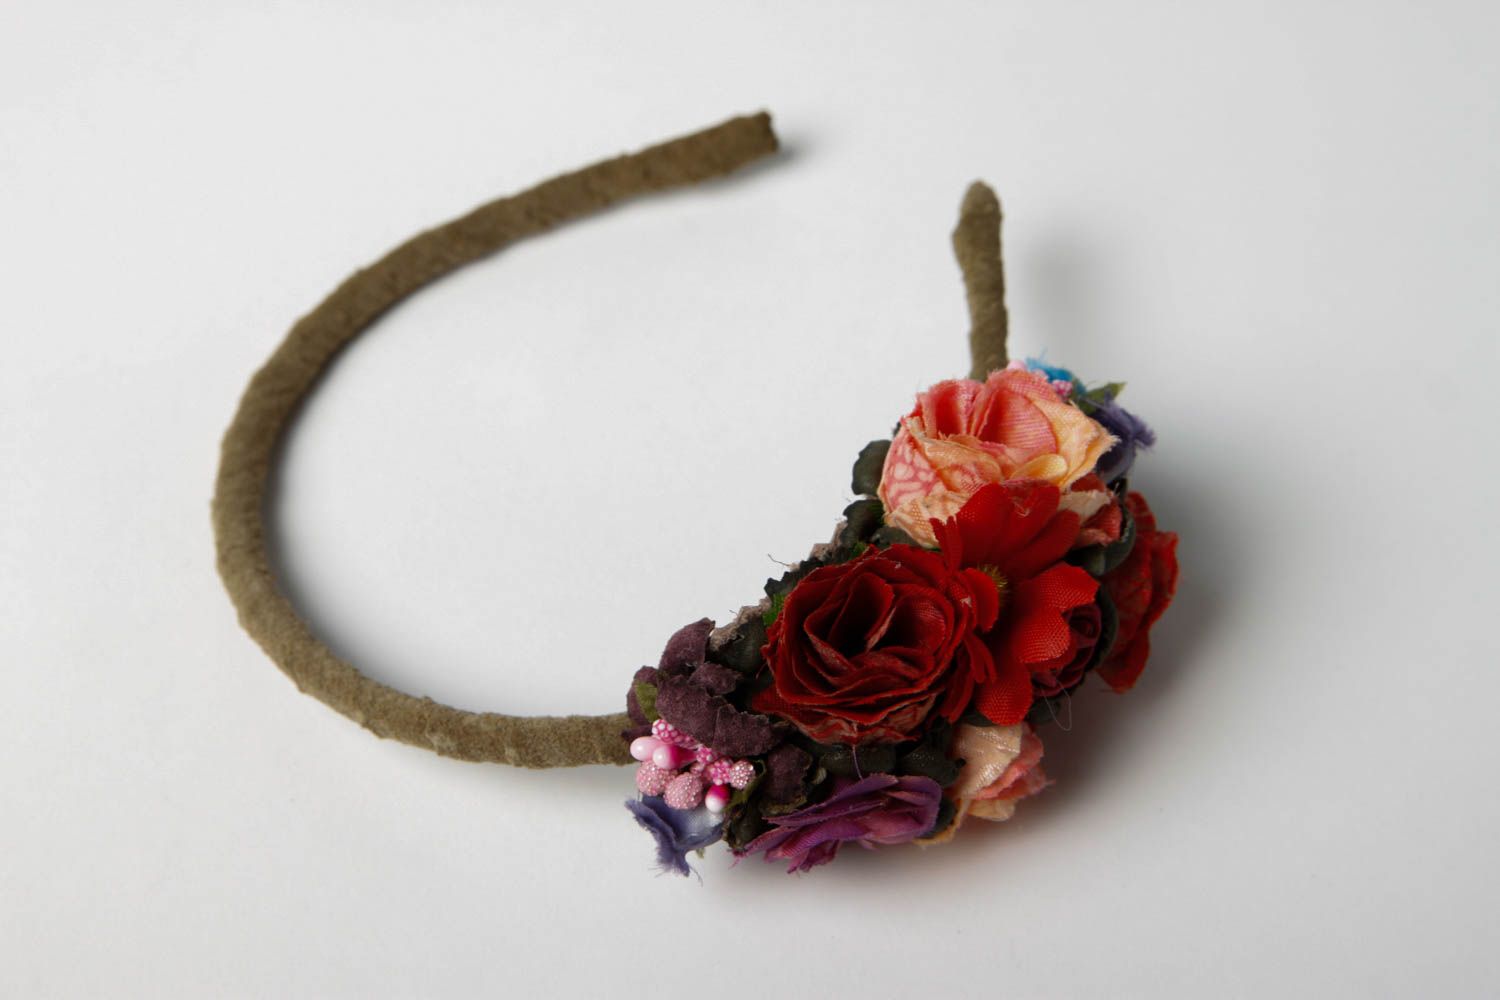 Stylish handmade leather headband flower hair bands leather goods gifts for her photo 4